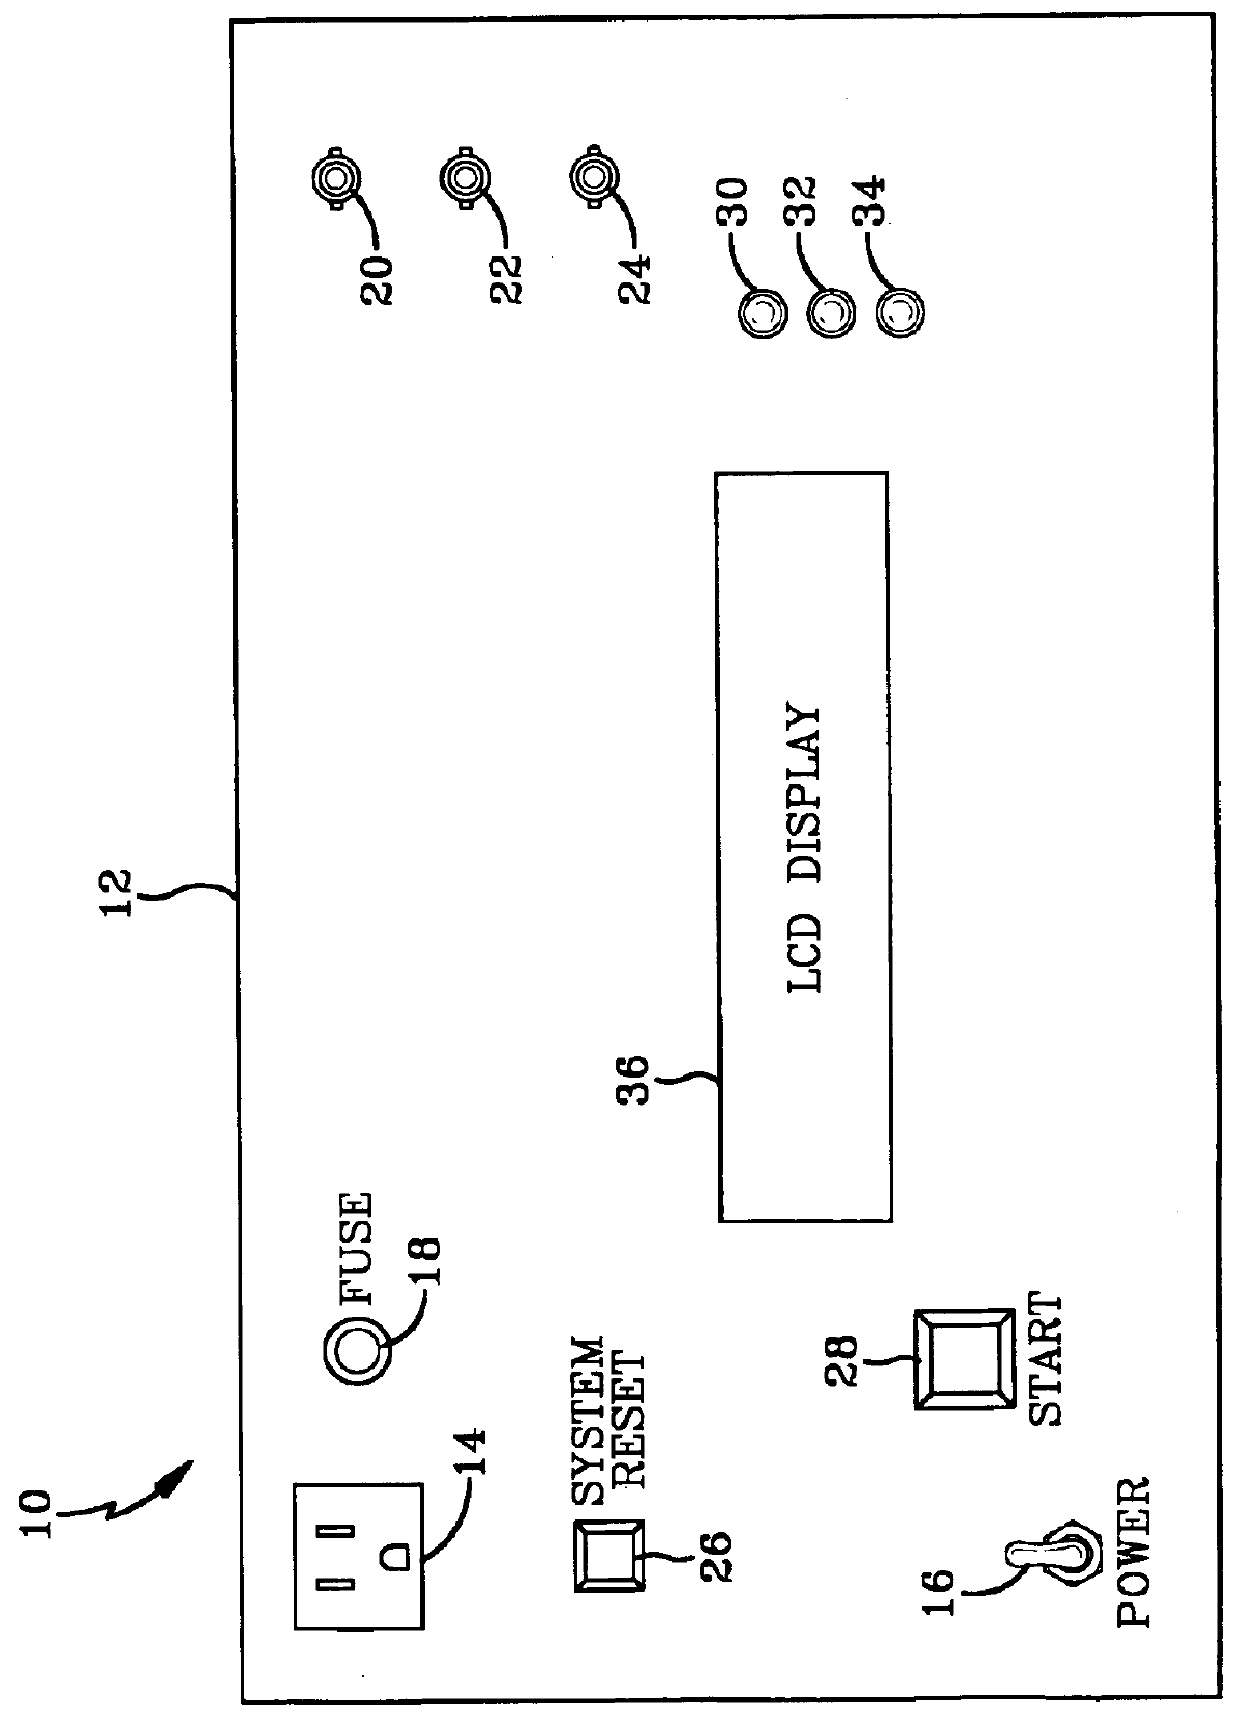 System and a method of operation thereof for analyzing the performance of a tape recorder